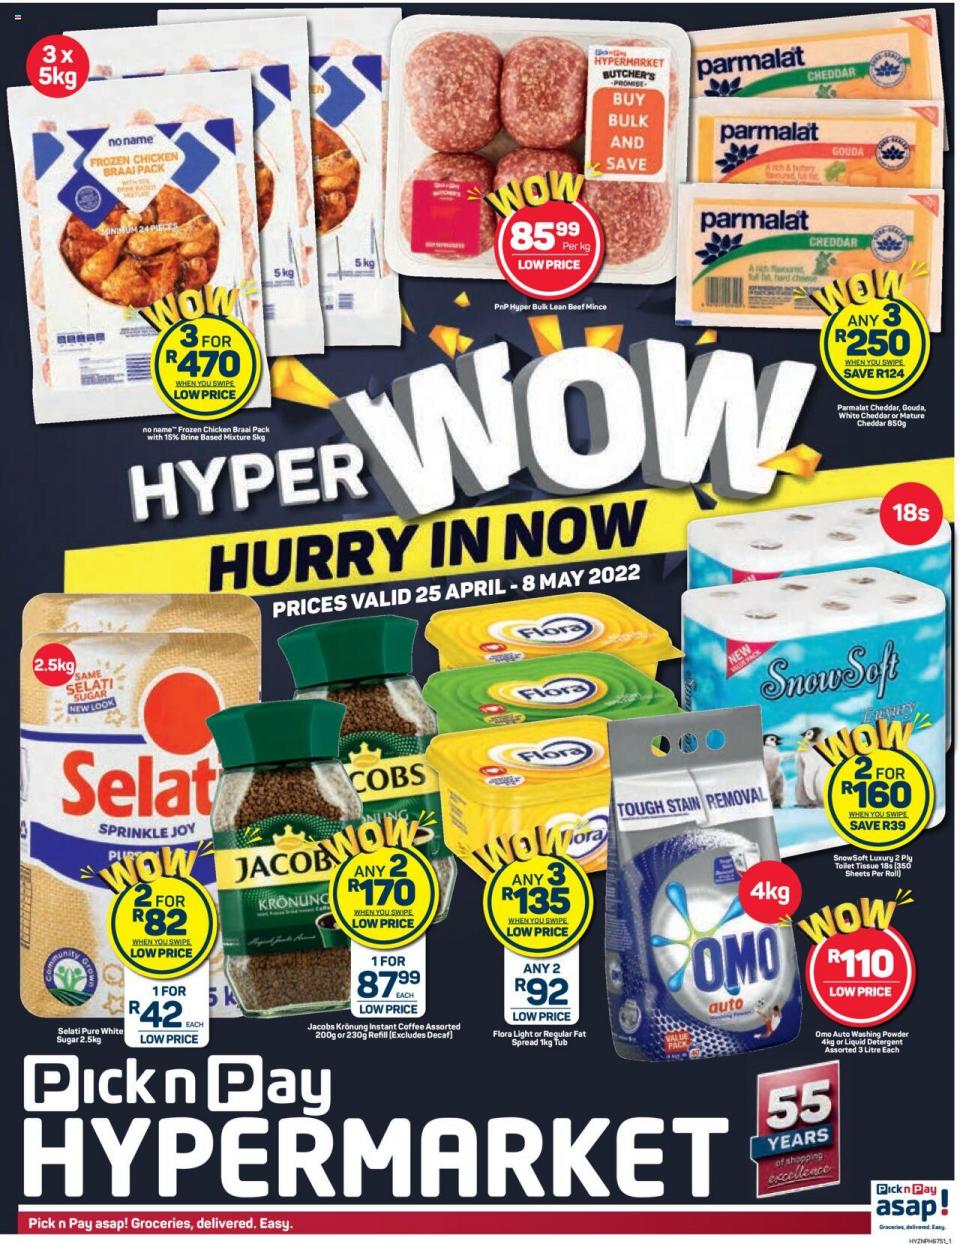 Pick n Pay Specials Hyper 25 Apr – 8 May 2022